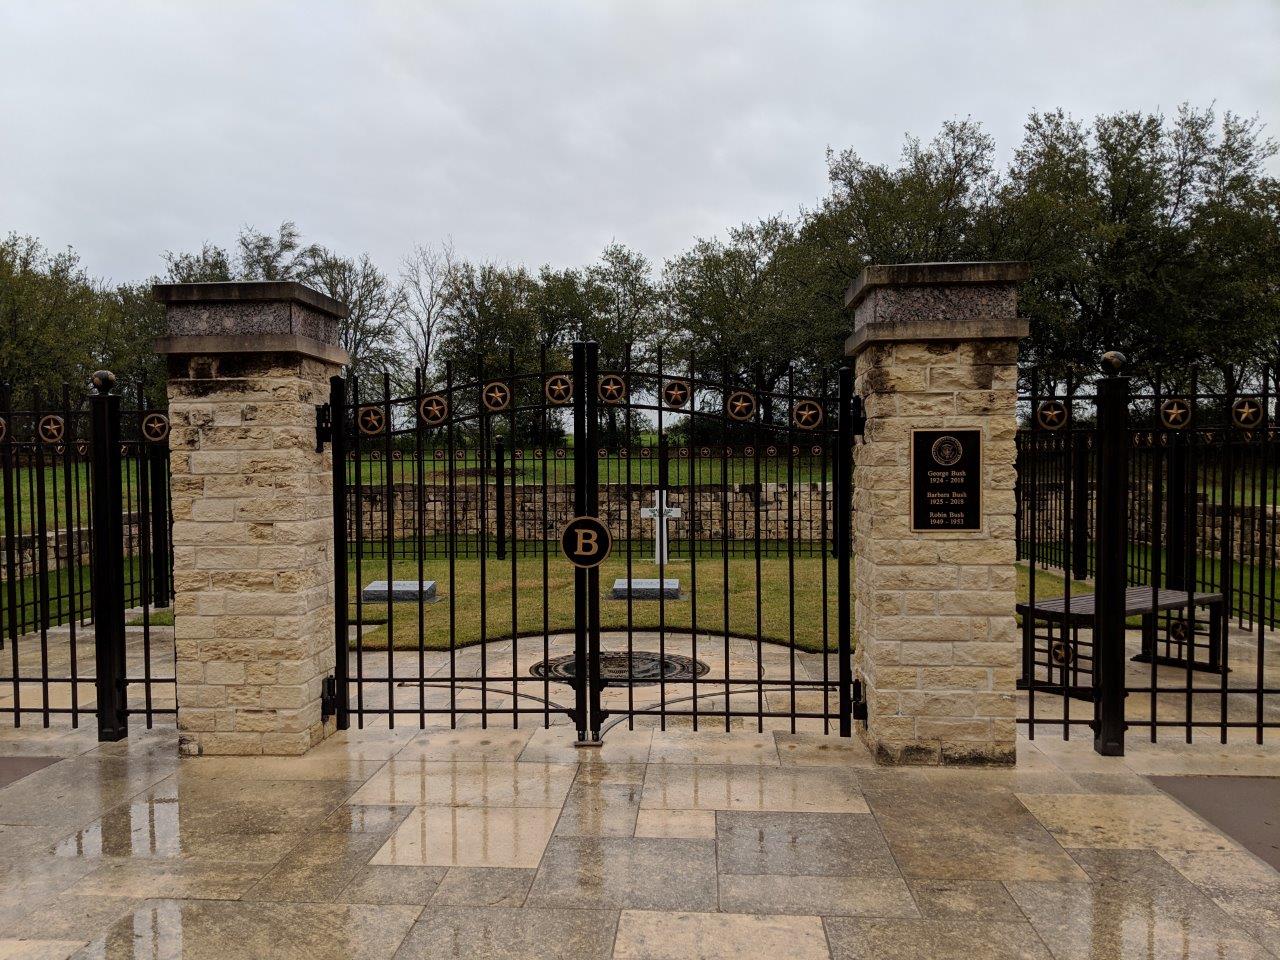 George Bush buried at College Station